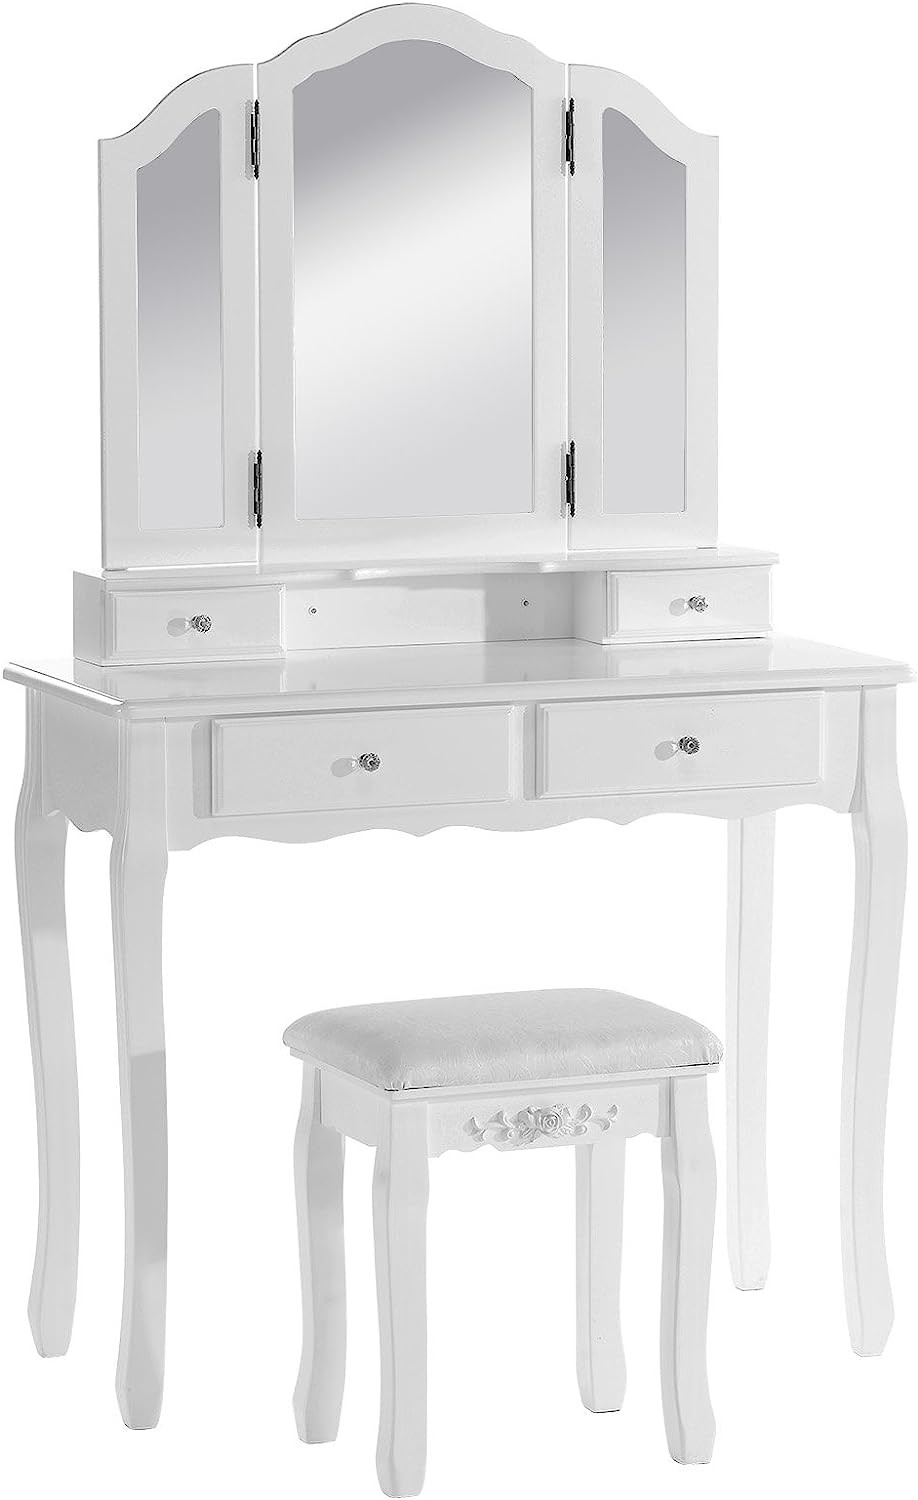 Dressing Table Cosmetic Table Dressing Table Set with 3 Mirrors and 1 Stool  4 Drawers White Makeup Desk 90 x 40 x 145cm